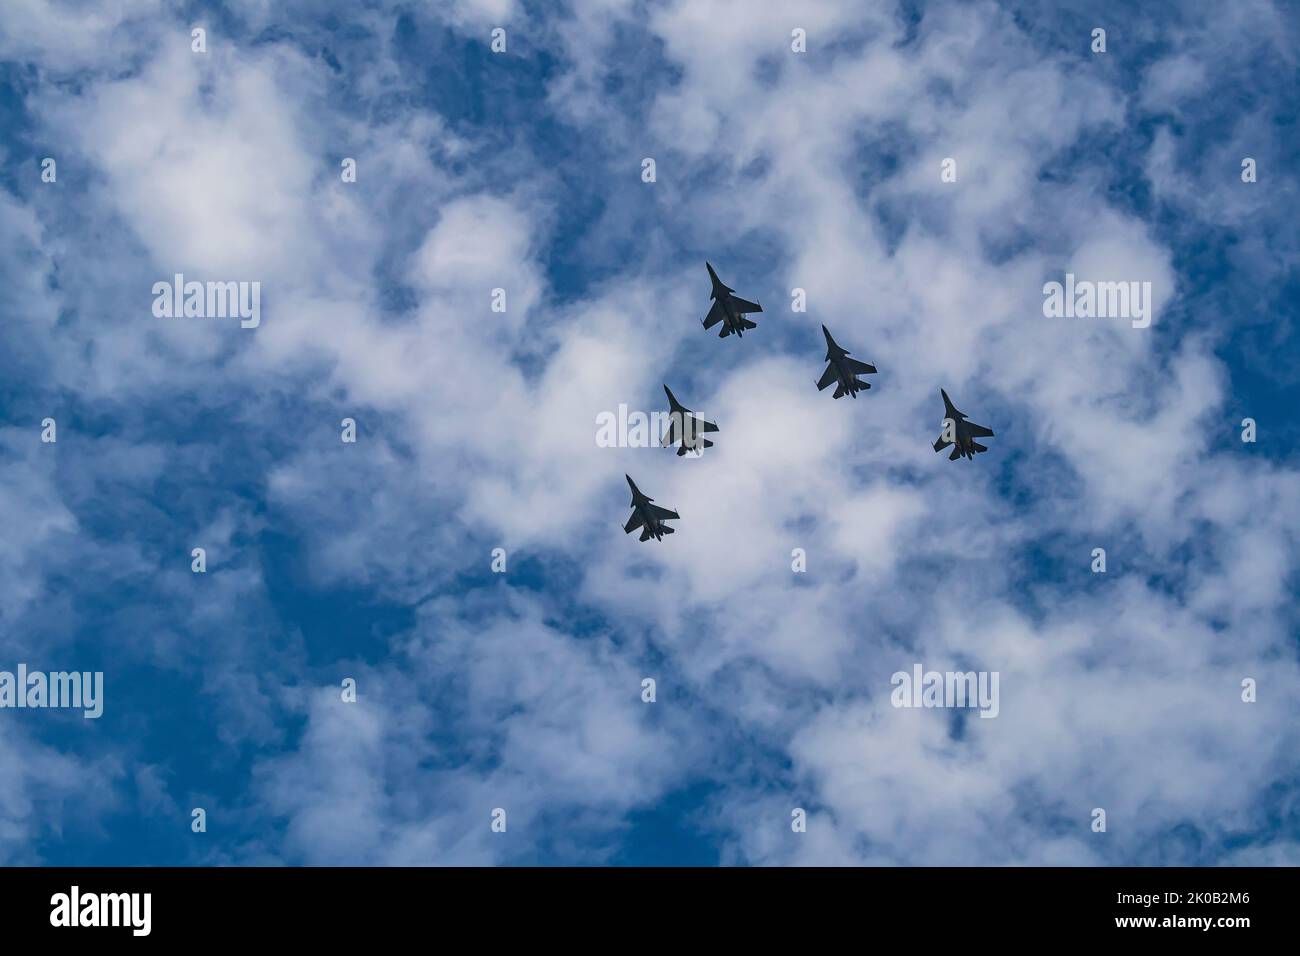 Silhouette of Royal Malaysian Air Force's Sukhoi Su-30MKM fly in formation across blue sky with thin clouds. Stock Photo